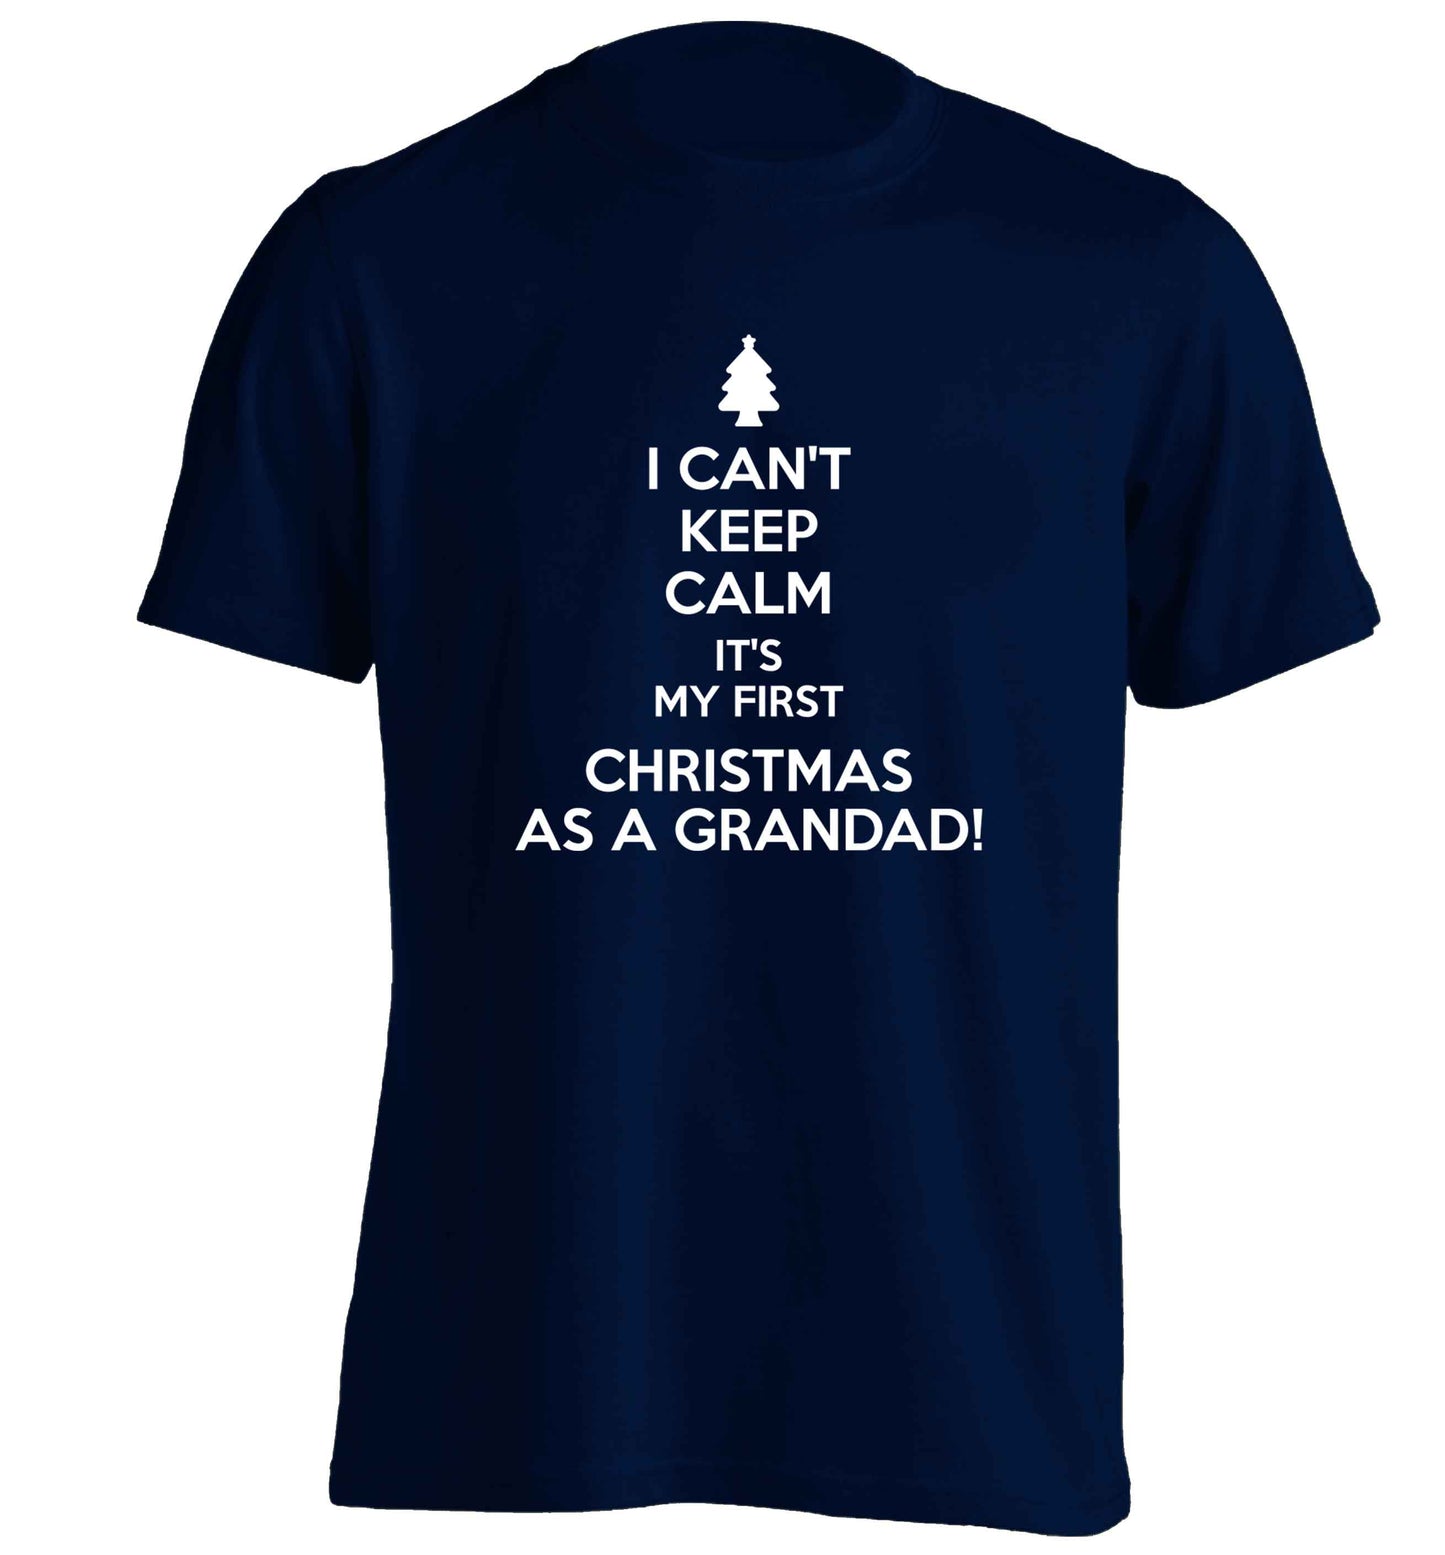 I can't keep calm it's my first Christmas as a grandad! adults unisex navy Tshirt 2XL